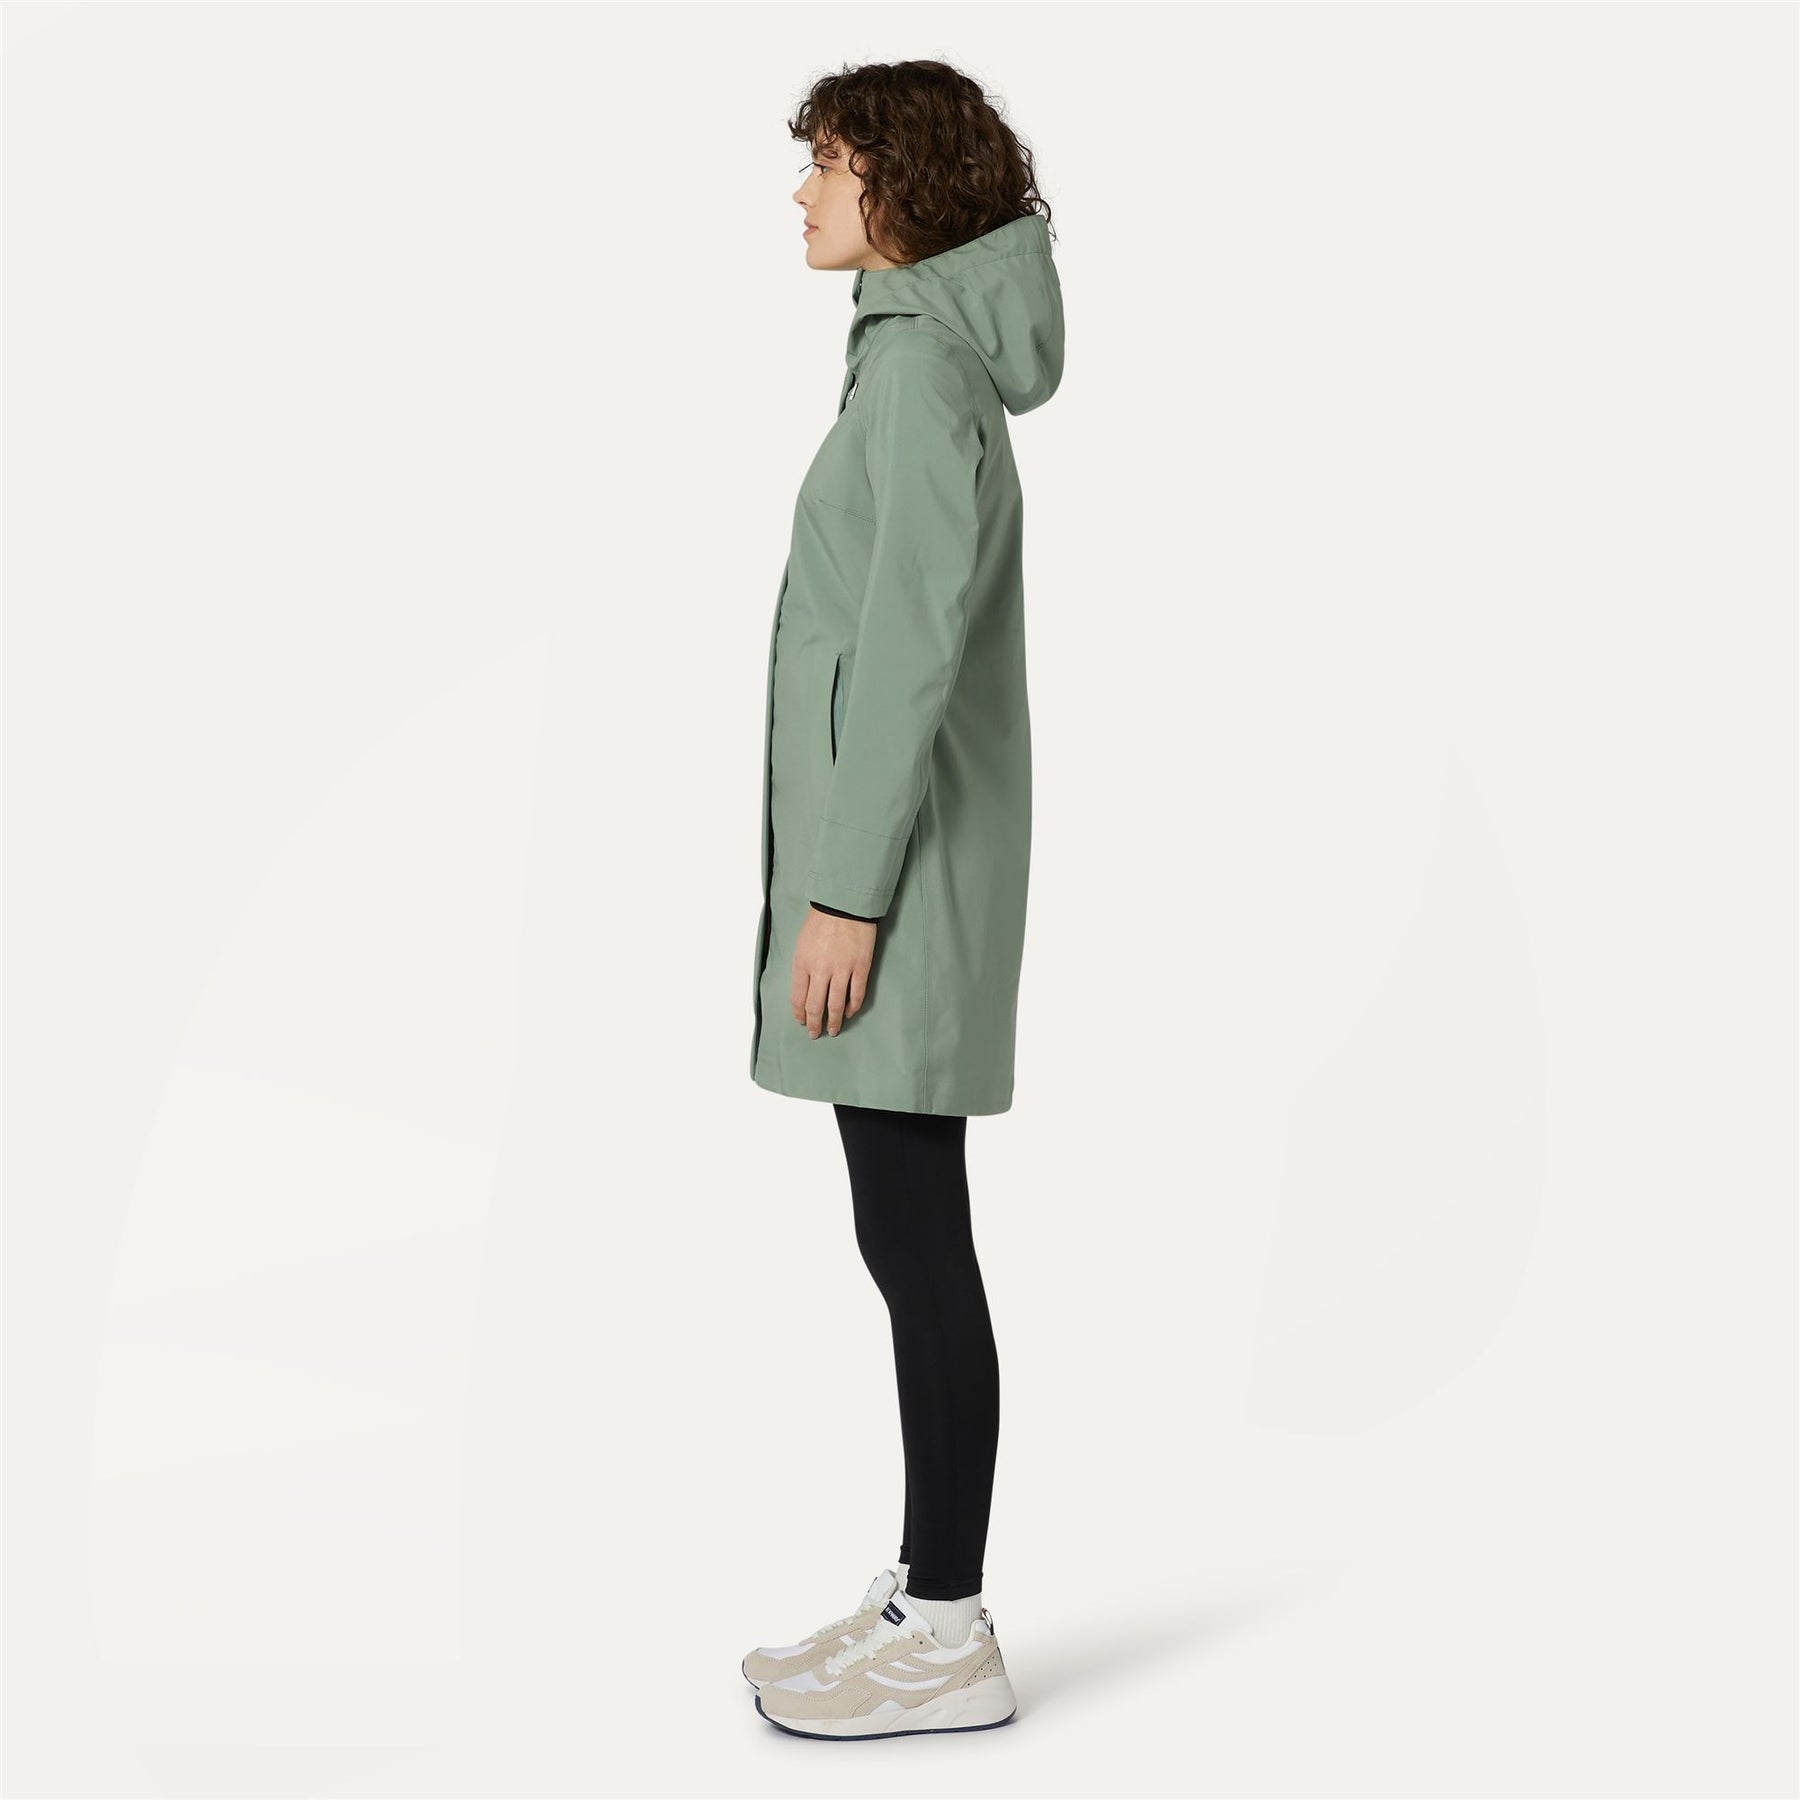 Jackets Woman STEPHY – GREEN BONDED JERSEY FJORD LENGTH 3/4